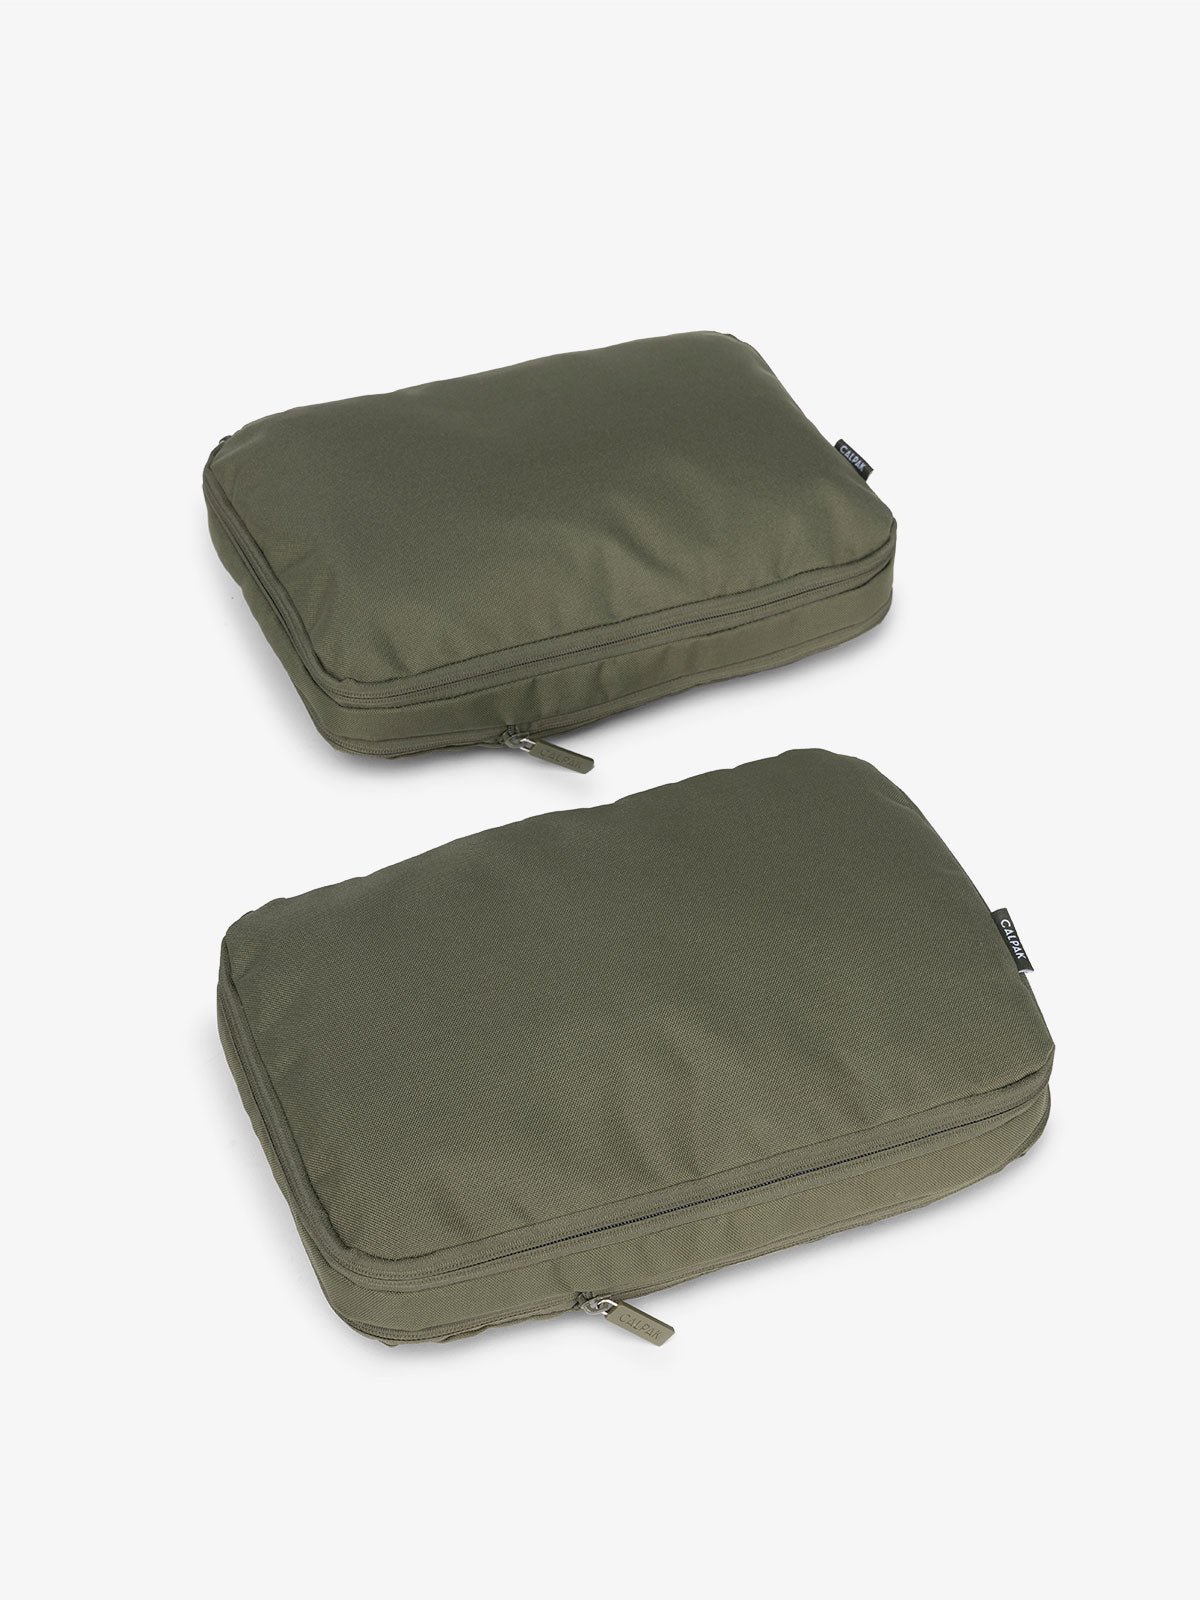 CALPAK compression packing cubes in moss